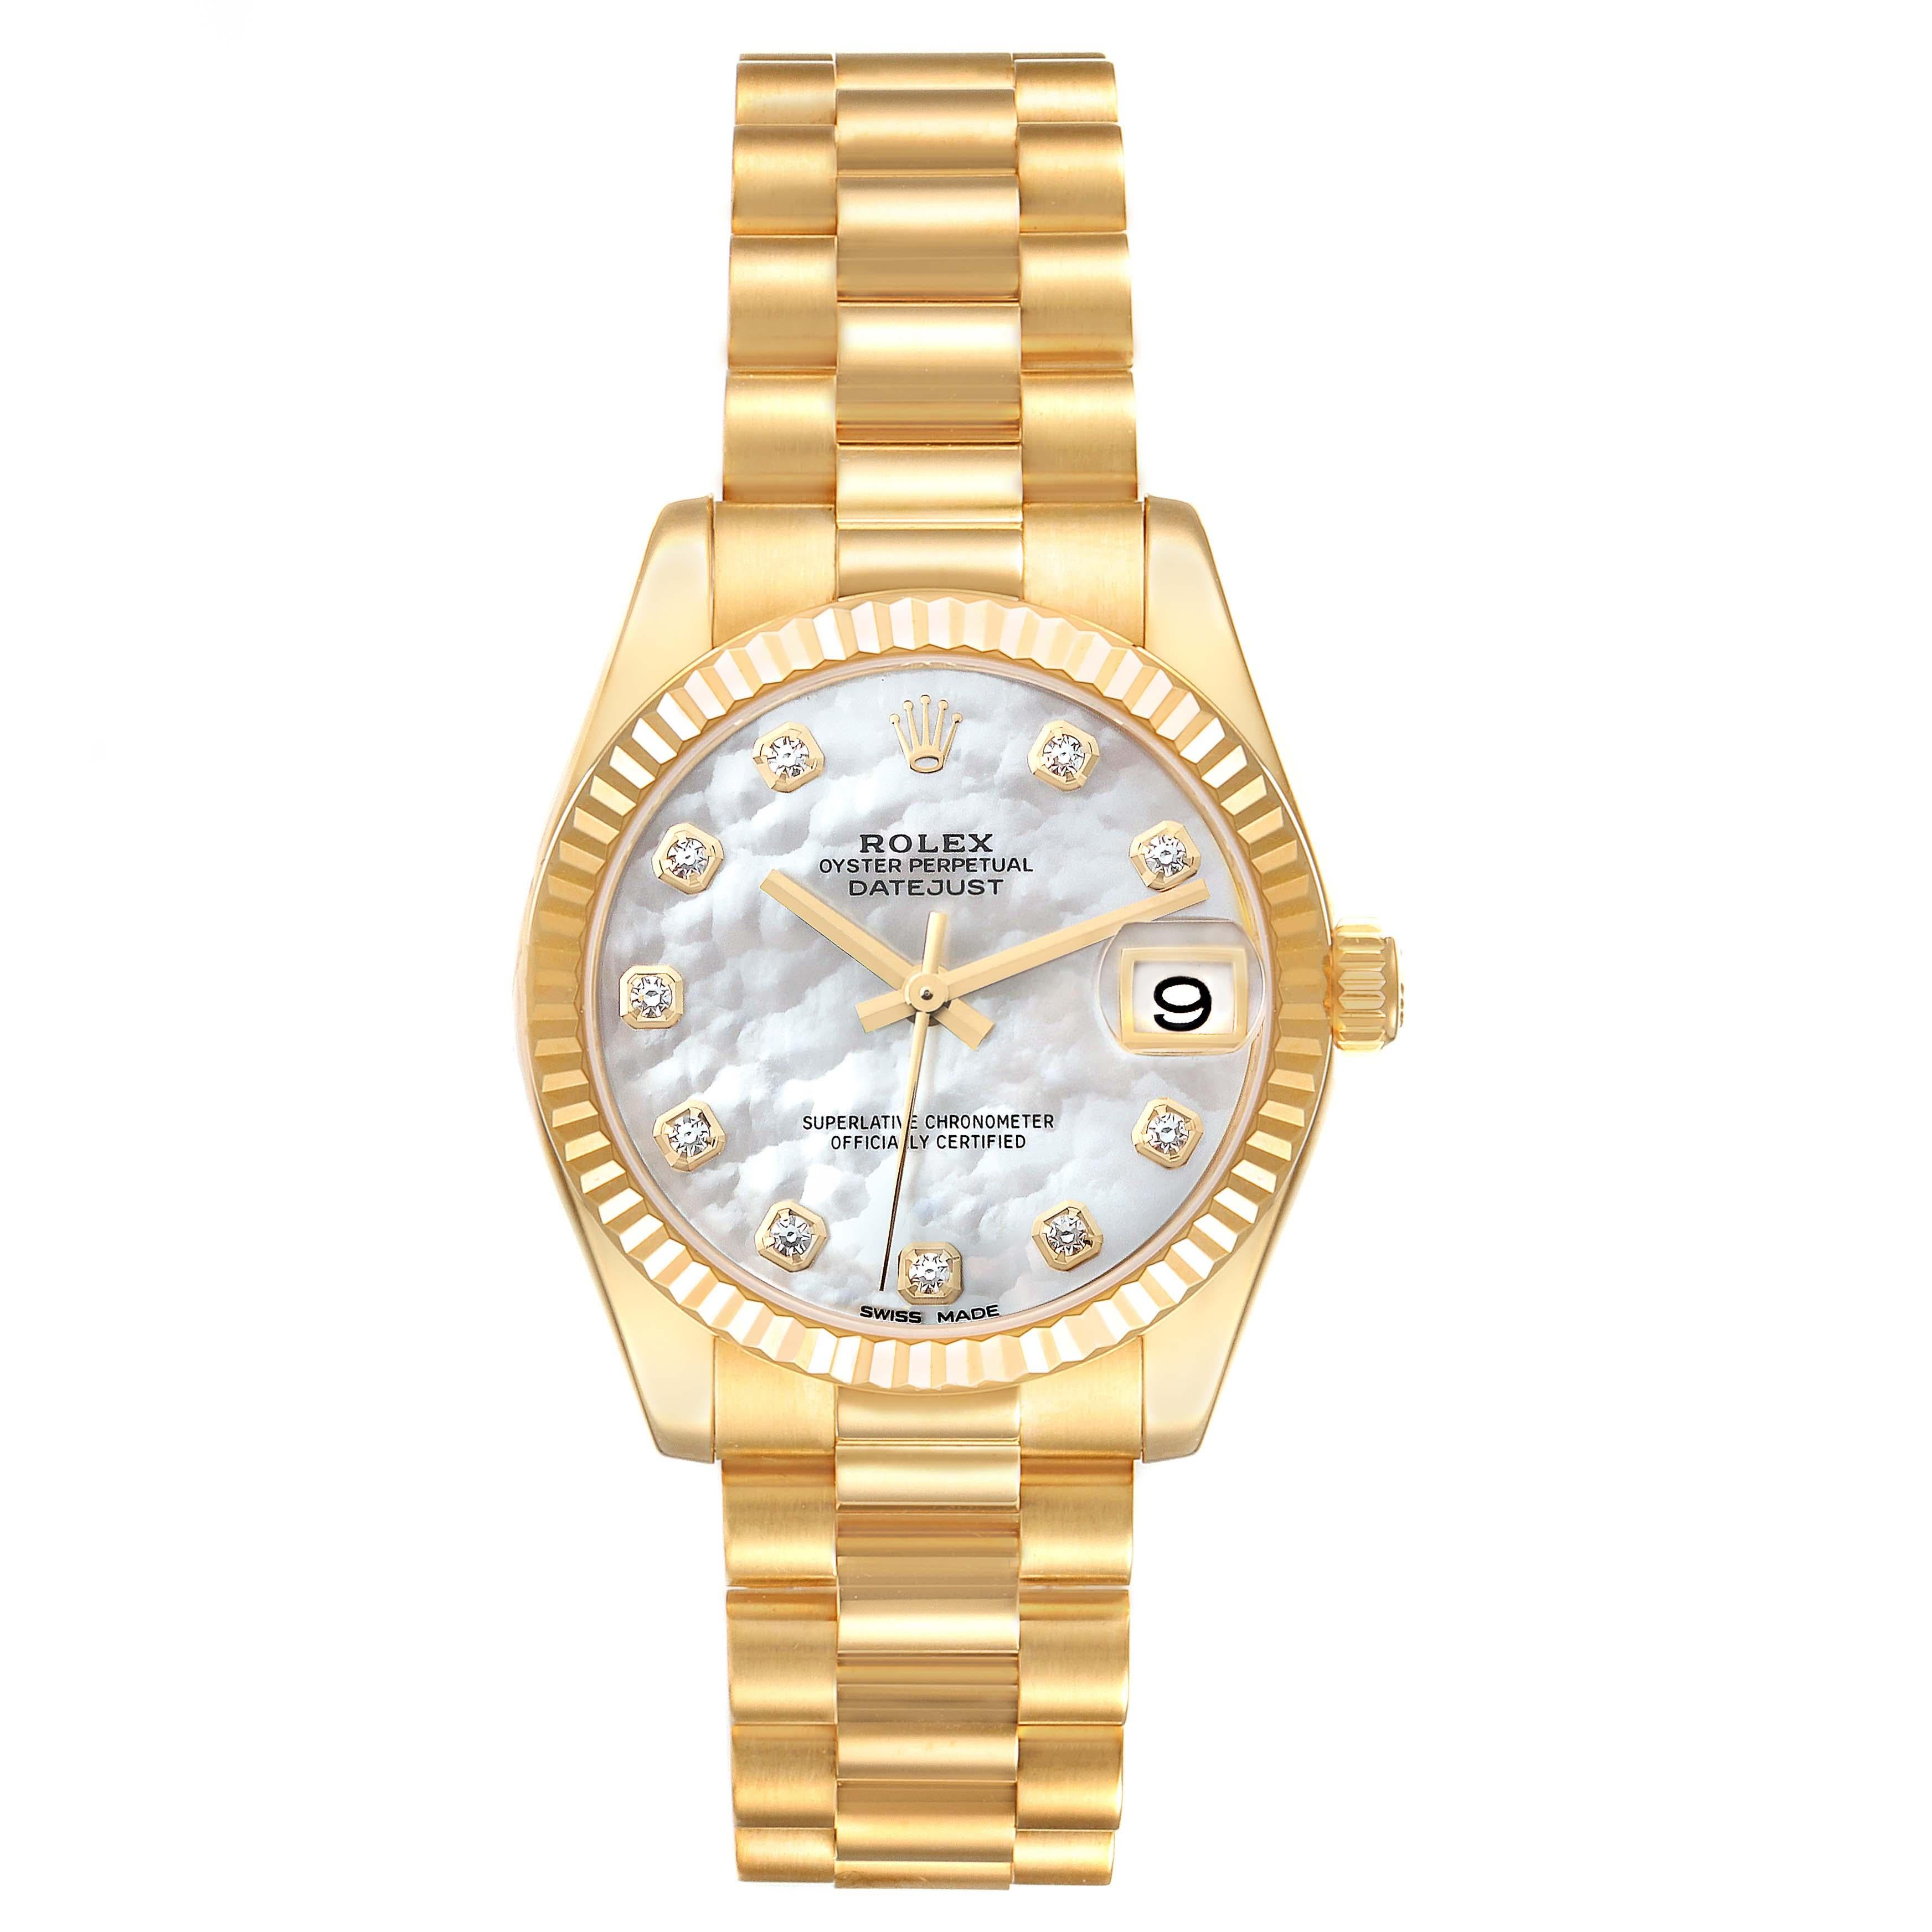 Rolex President Midsize Yellow Gold Mother Of Pearl Diamond Dial Ladies Watch 178278. Officially certified chronometer automatic self-winding movement. 18k yellow gold oyster case 31.0 mm in diameter. Rolex logo on a crown. 18k yellow gold fluted